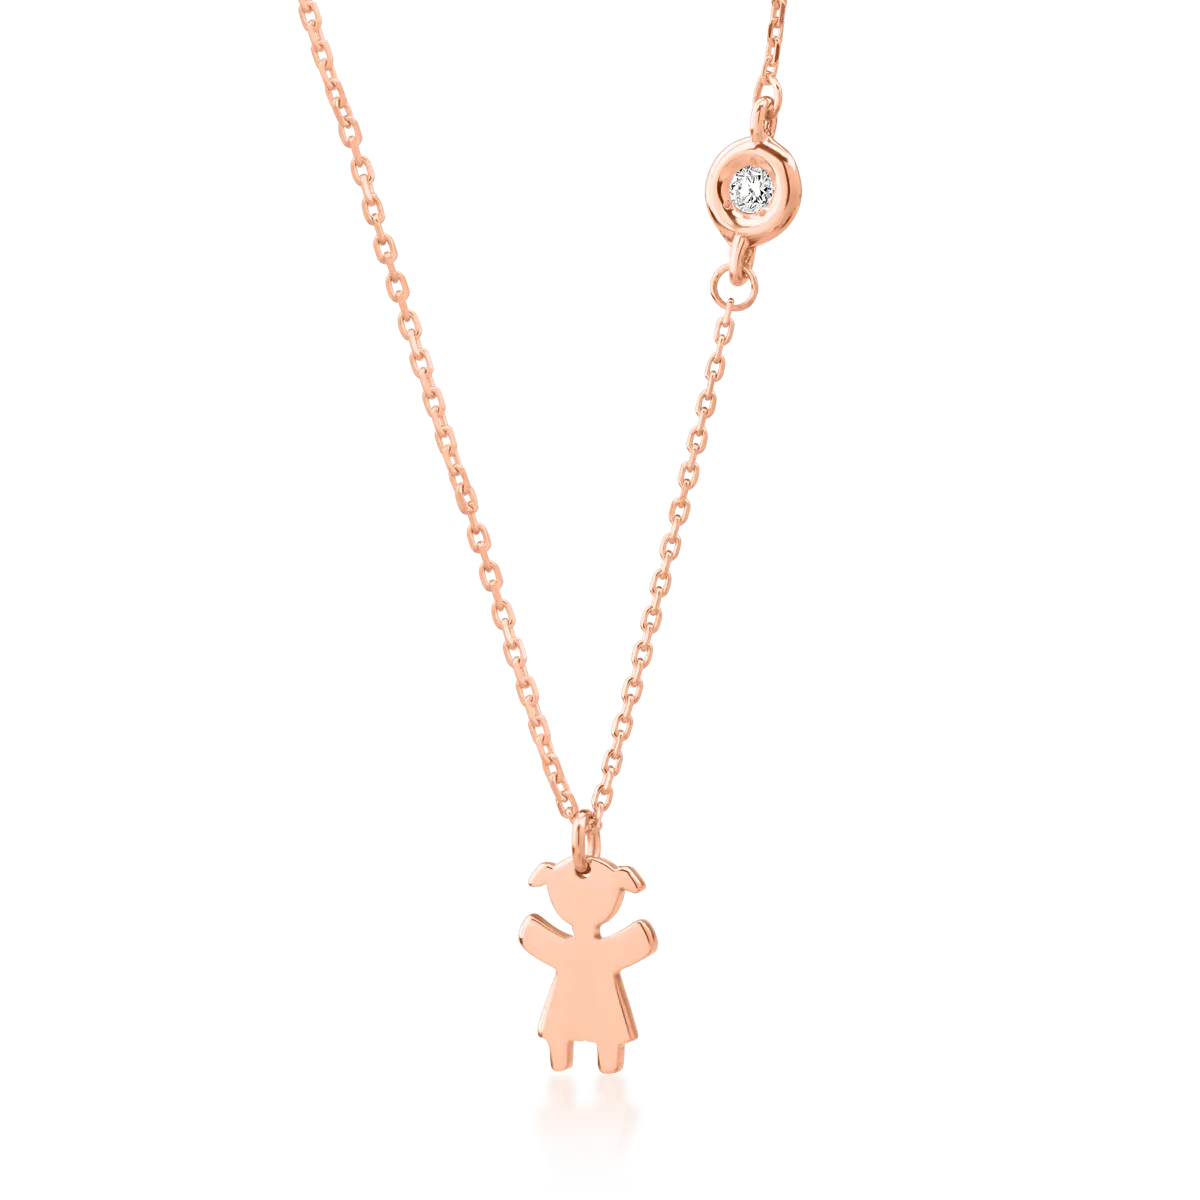 18K rose gold little girl pendant necklace with 0.02ct diamond